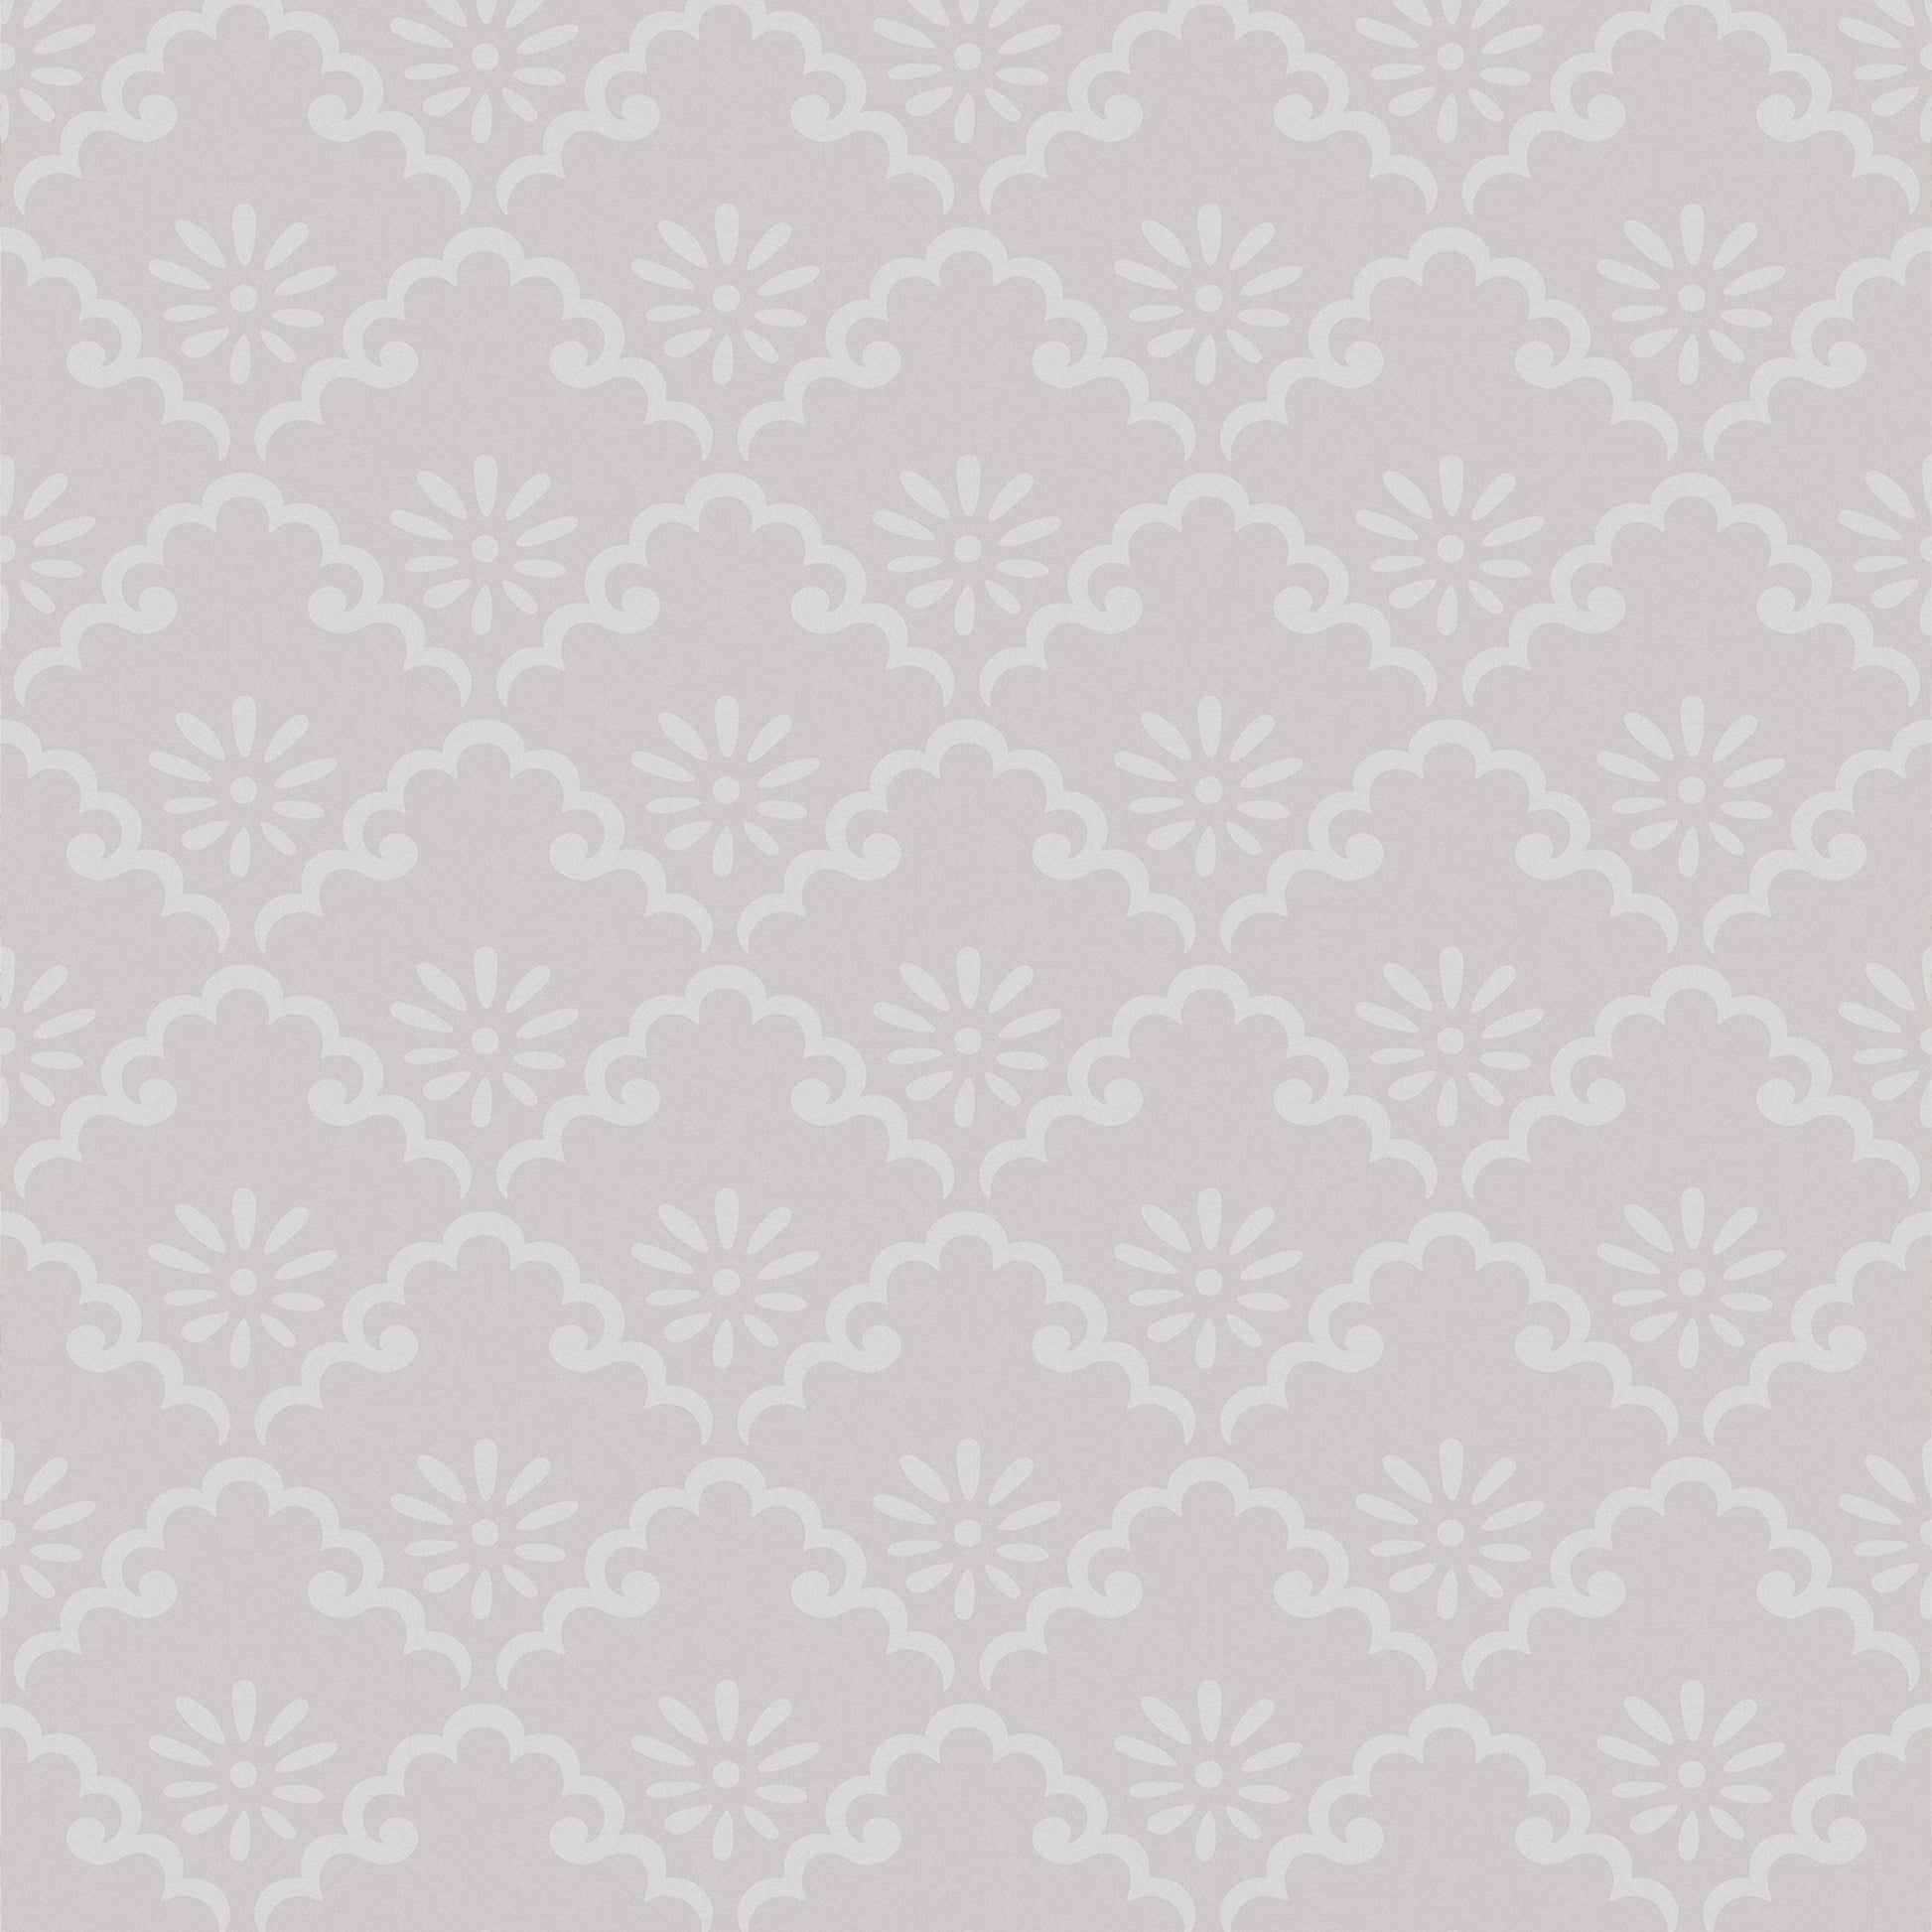 Purchase Laura Ashley Wallpaper Product# 118476 Coralie Sugared Grey